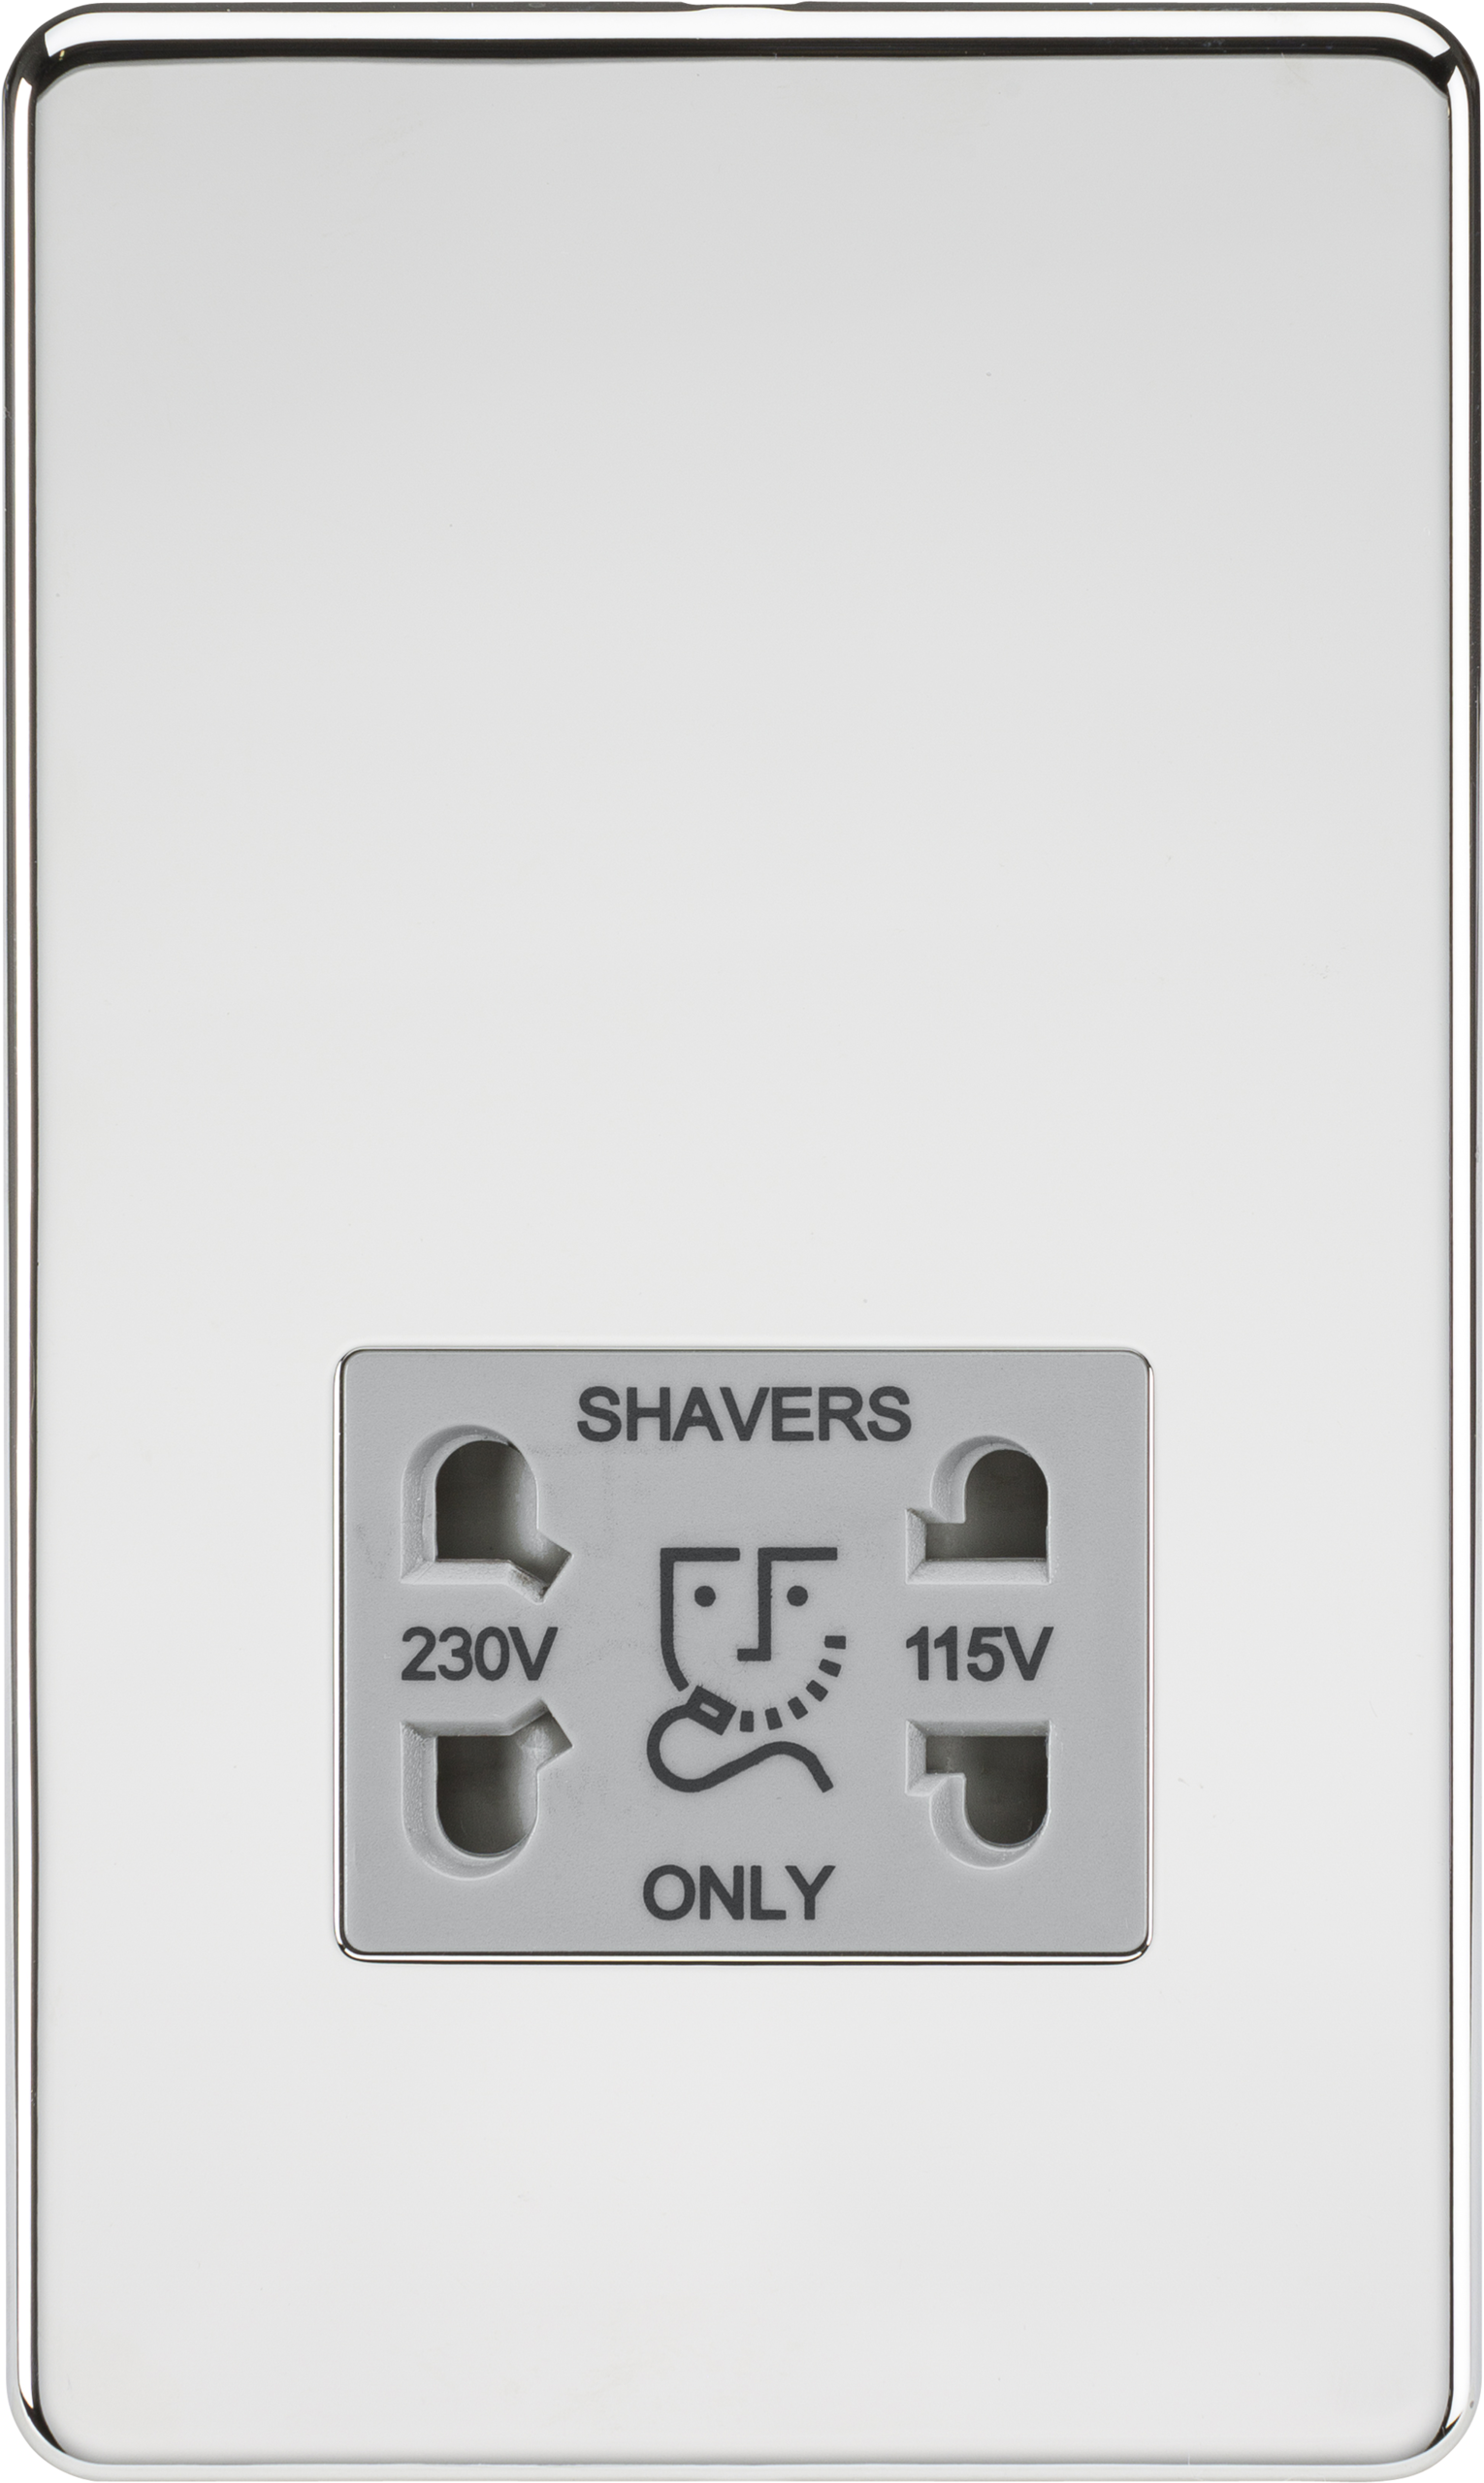 Screwless 115/230V Dual Voltage Shaver Socket - Polished Chrome With Grey Insert - SF8900PCG 